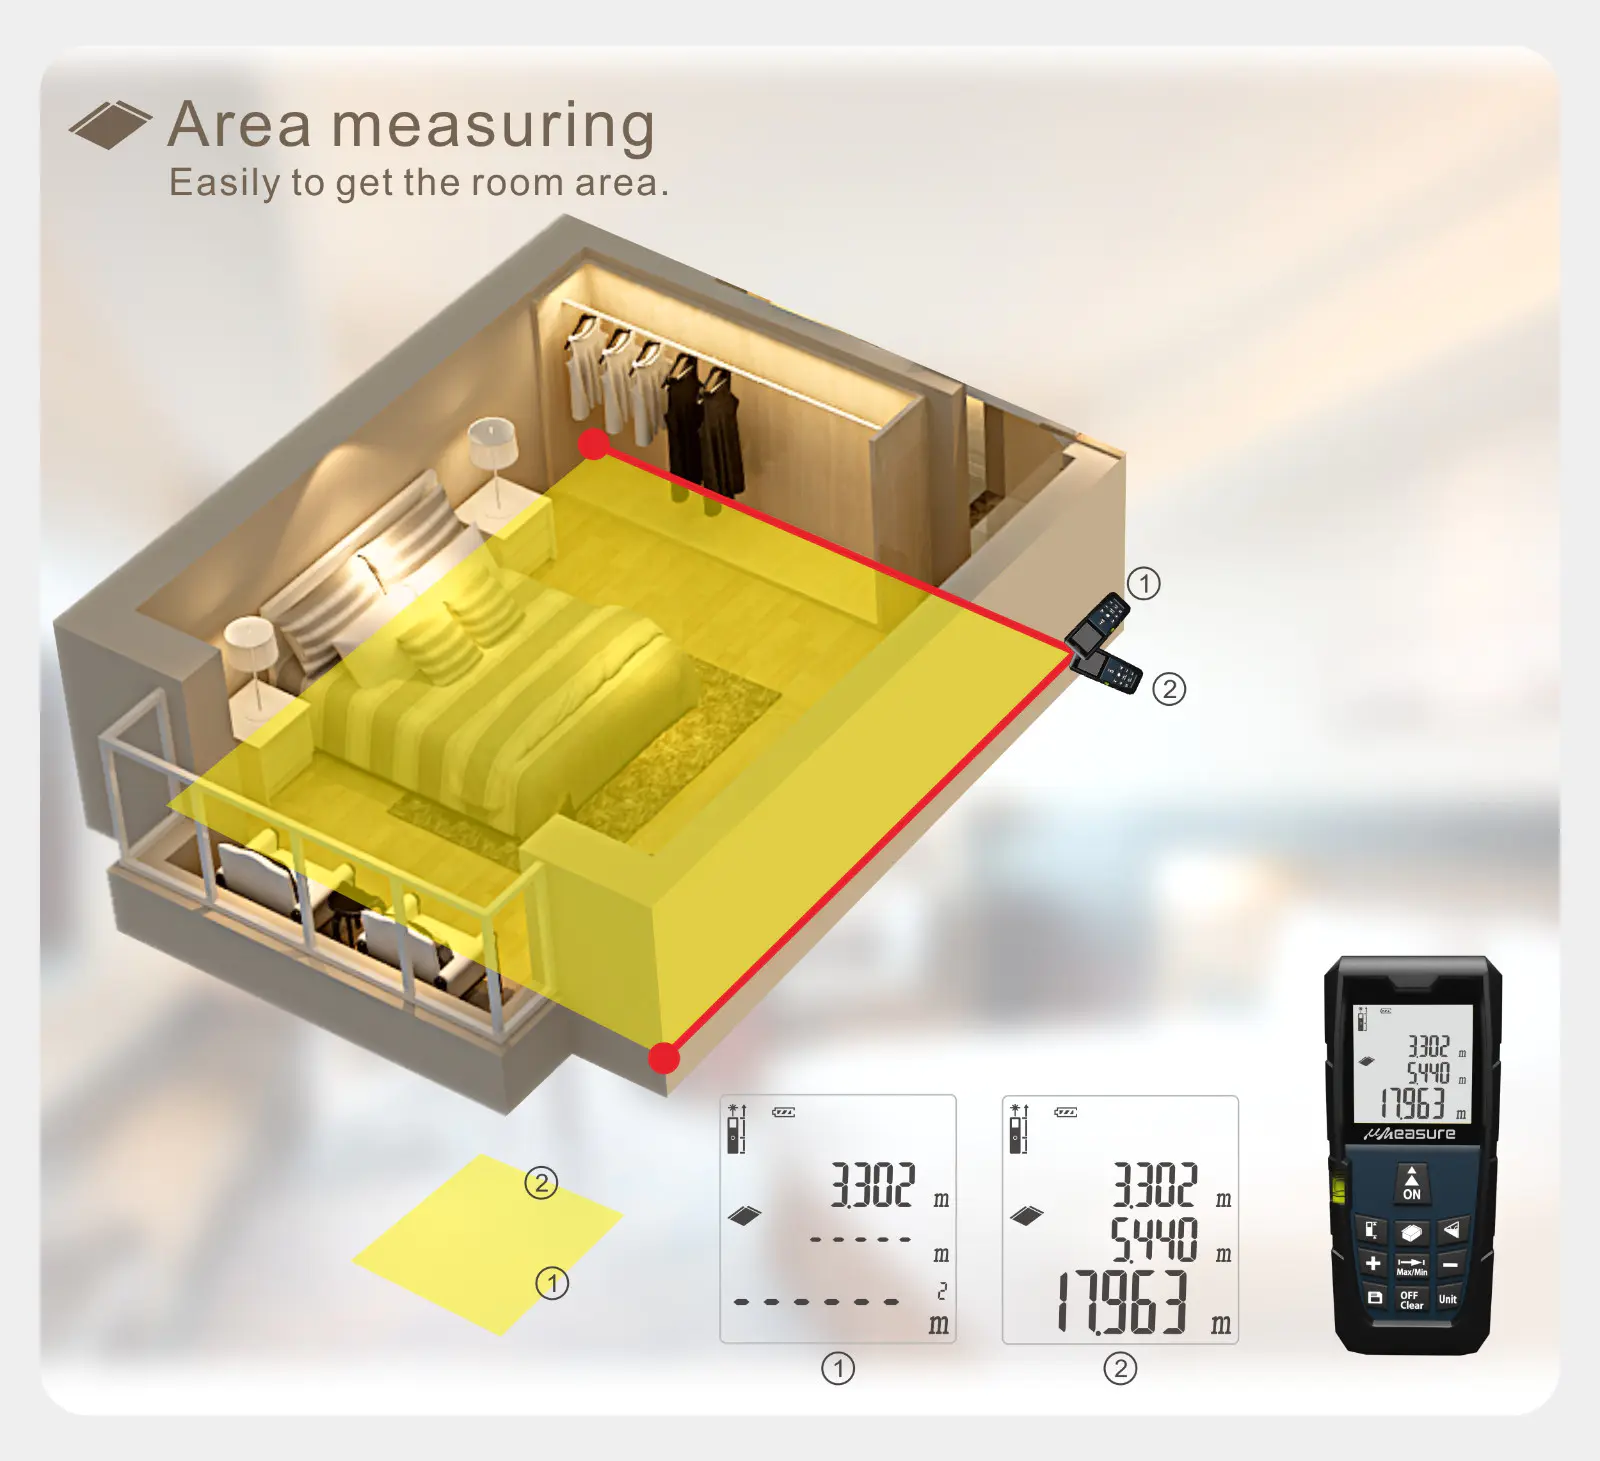 UMeasure carrying best laser distance measurer high-accuracy for wholesale